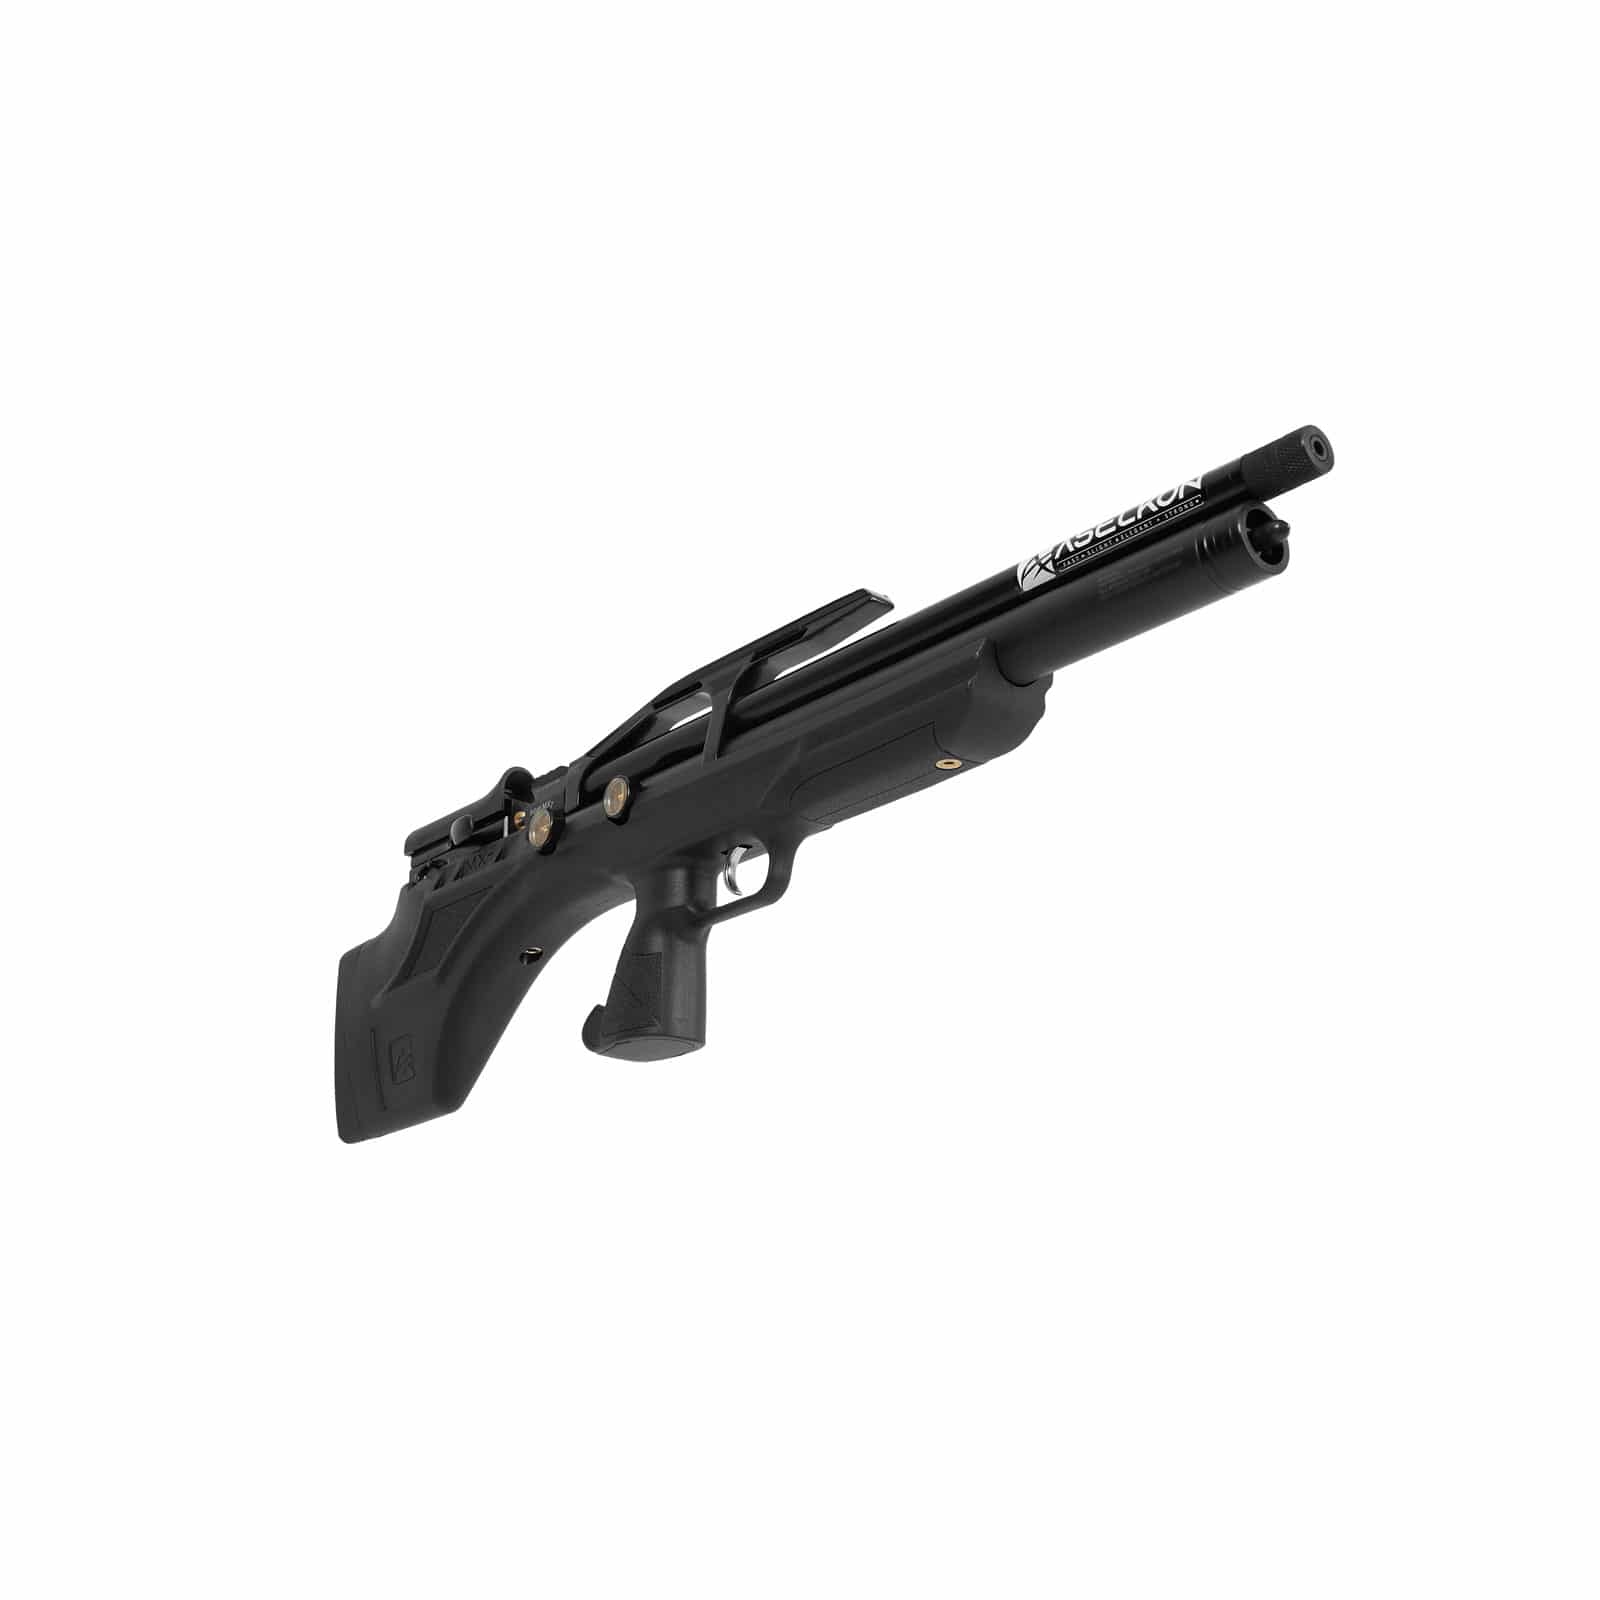 Right angle view of a black Aselkon MX7 .22 Caliber PCP Air Rifle - Synthetic Stock